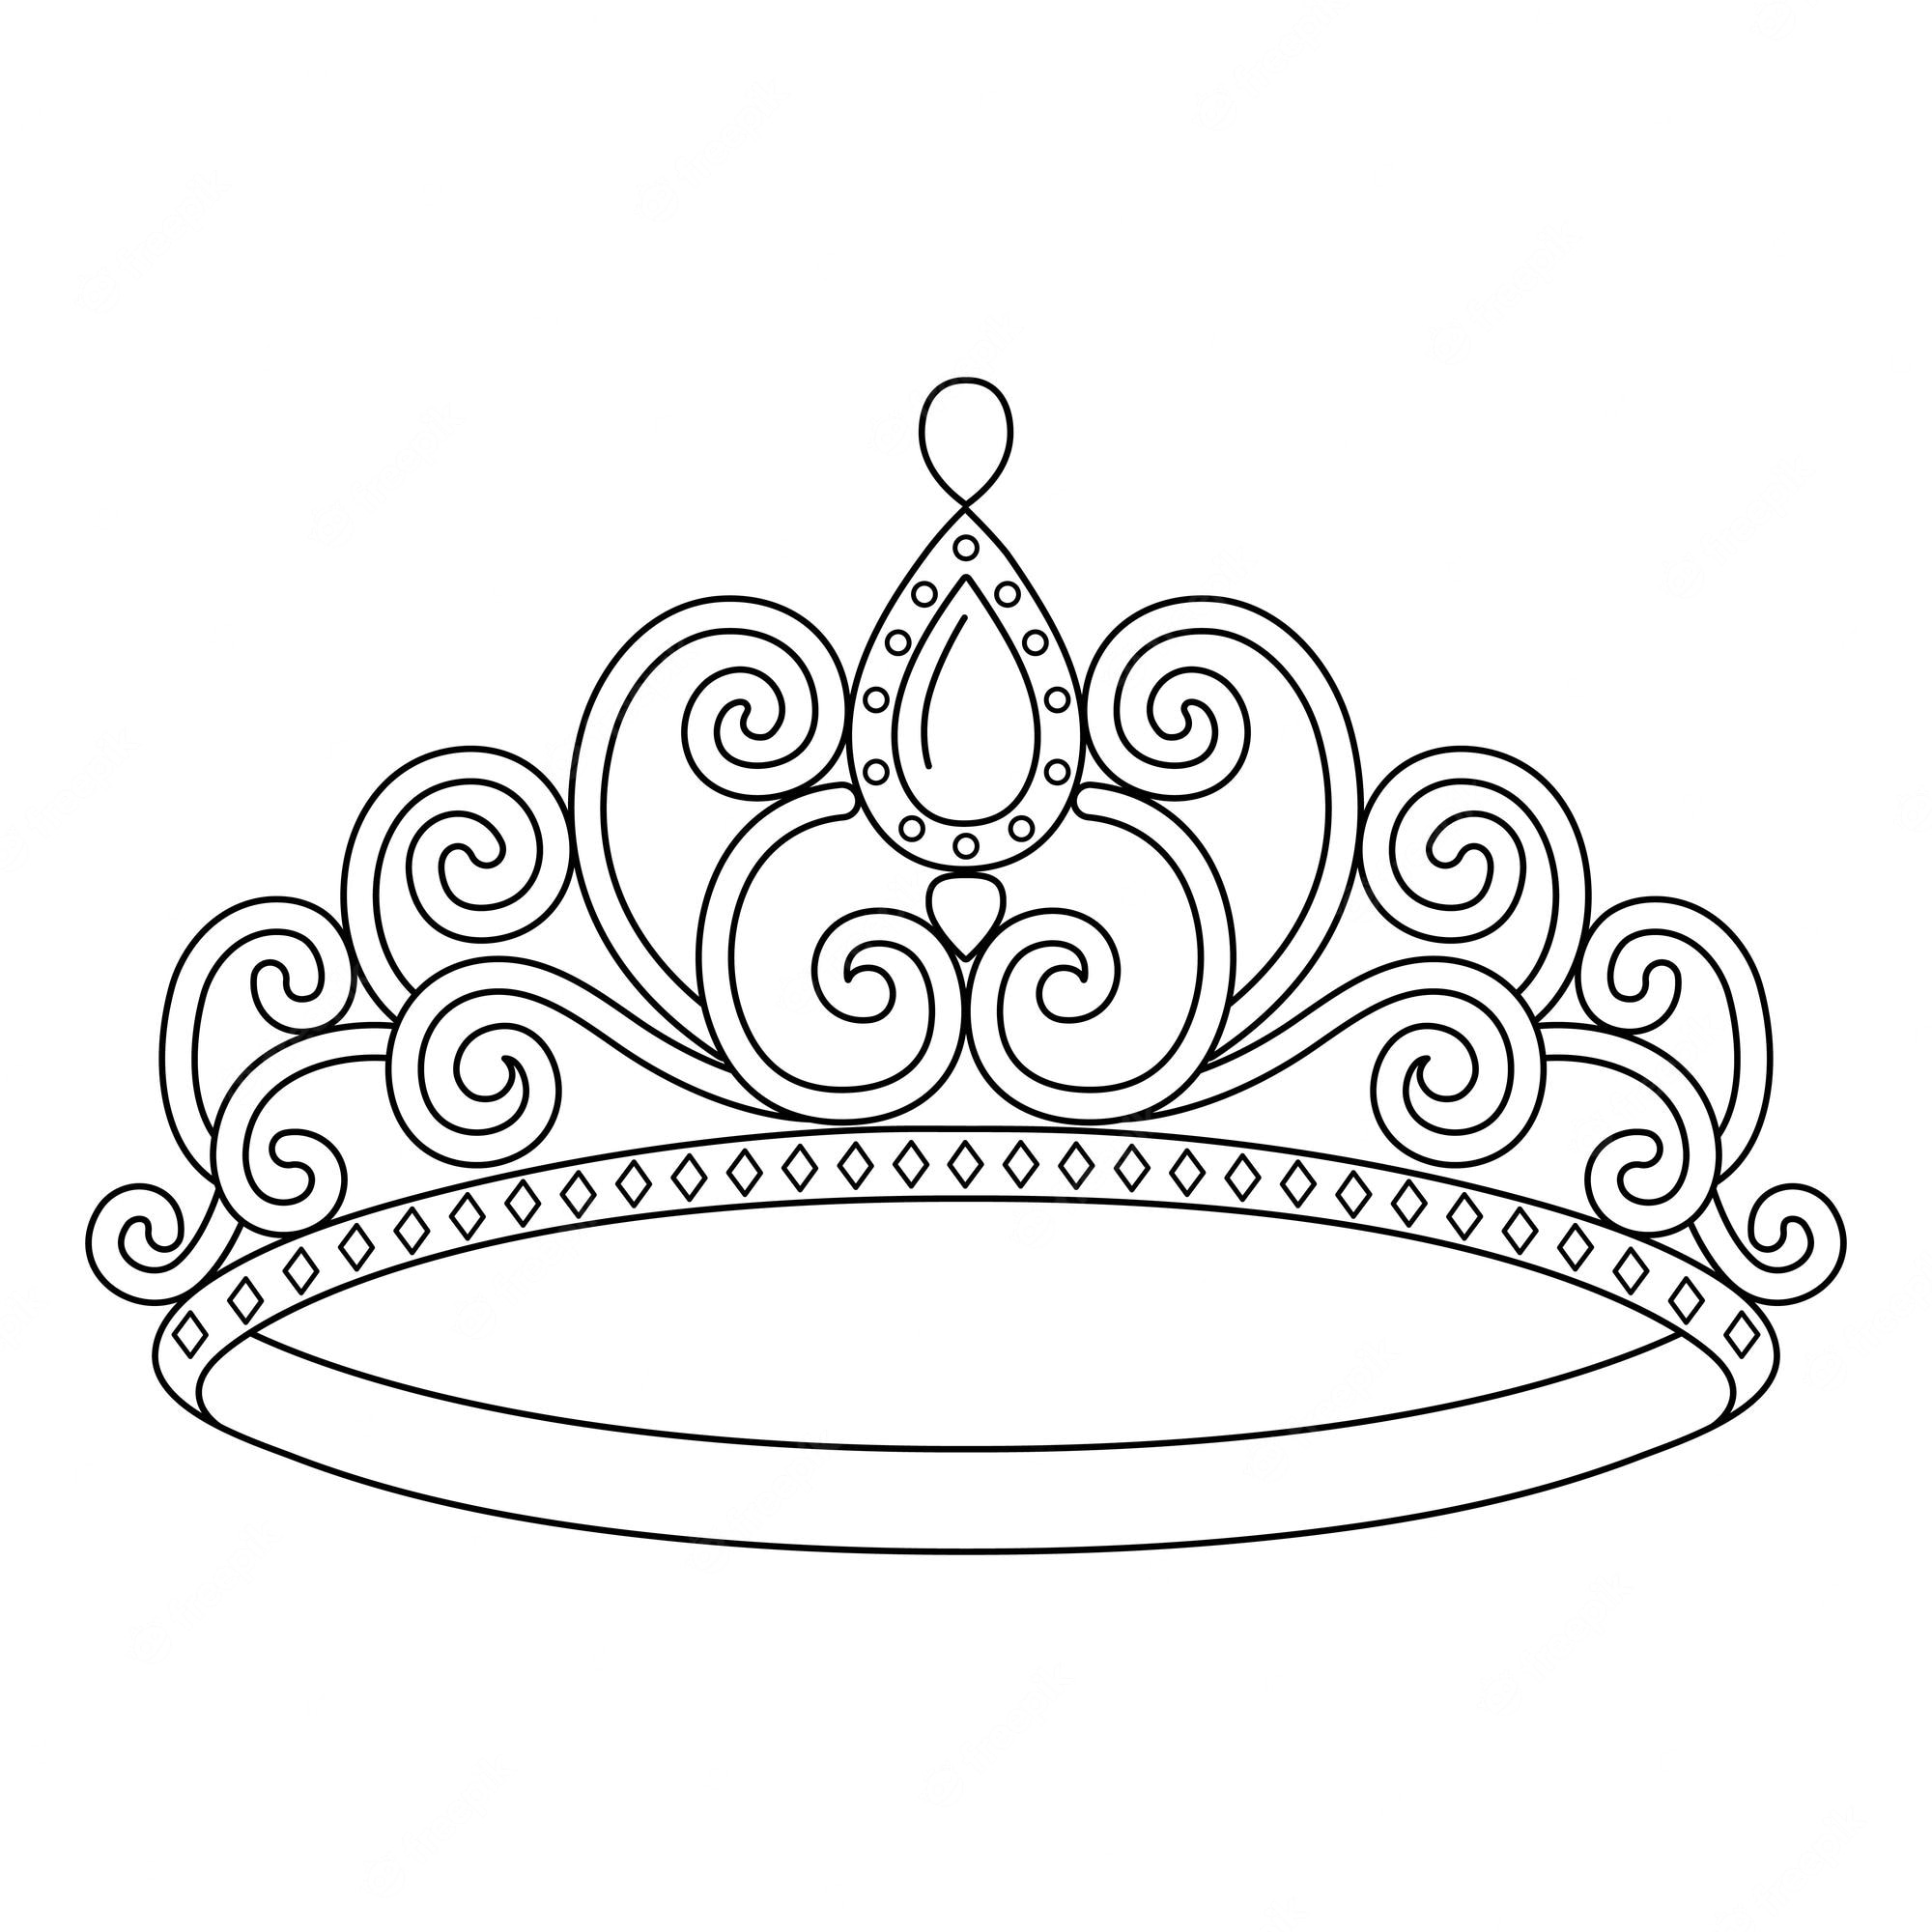 Premium Vector | Princess crown coloring page isolated